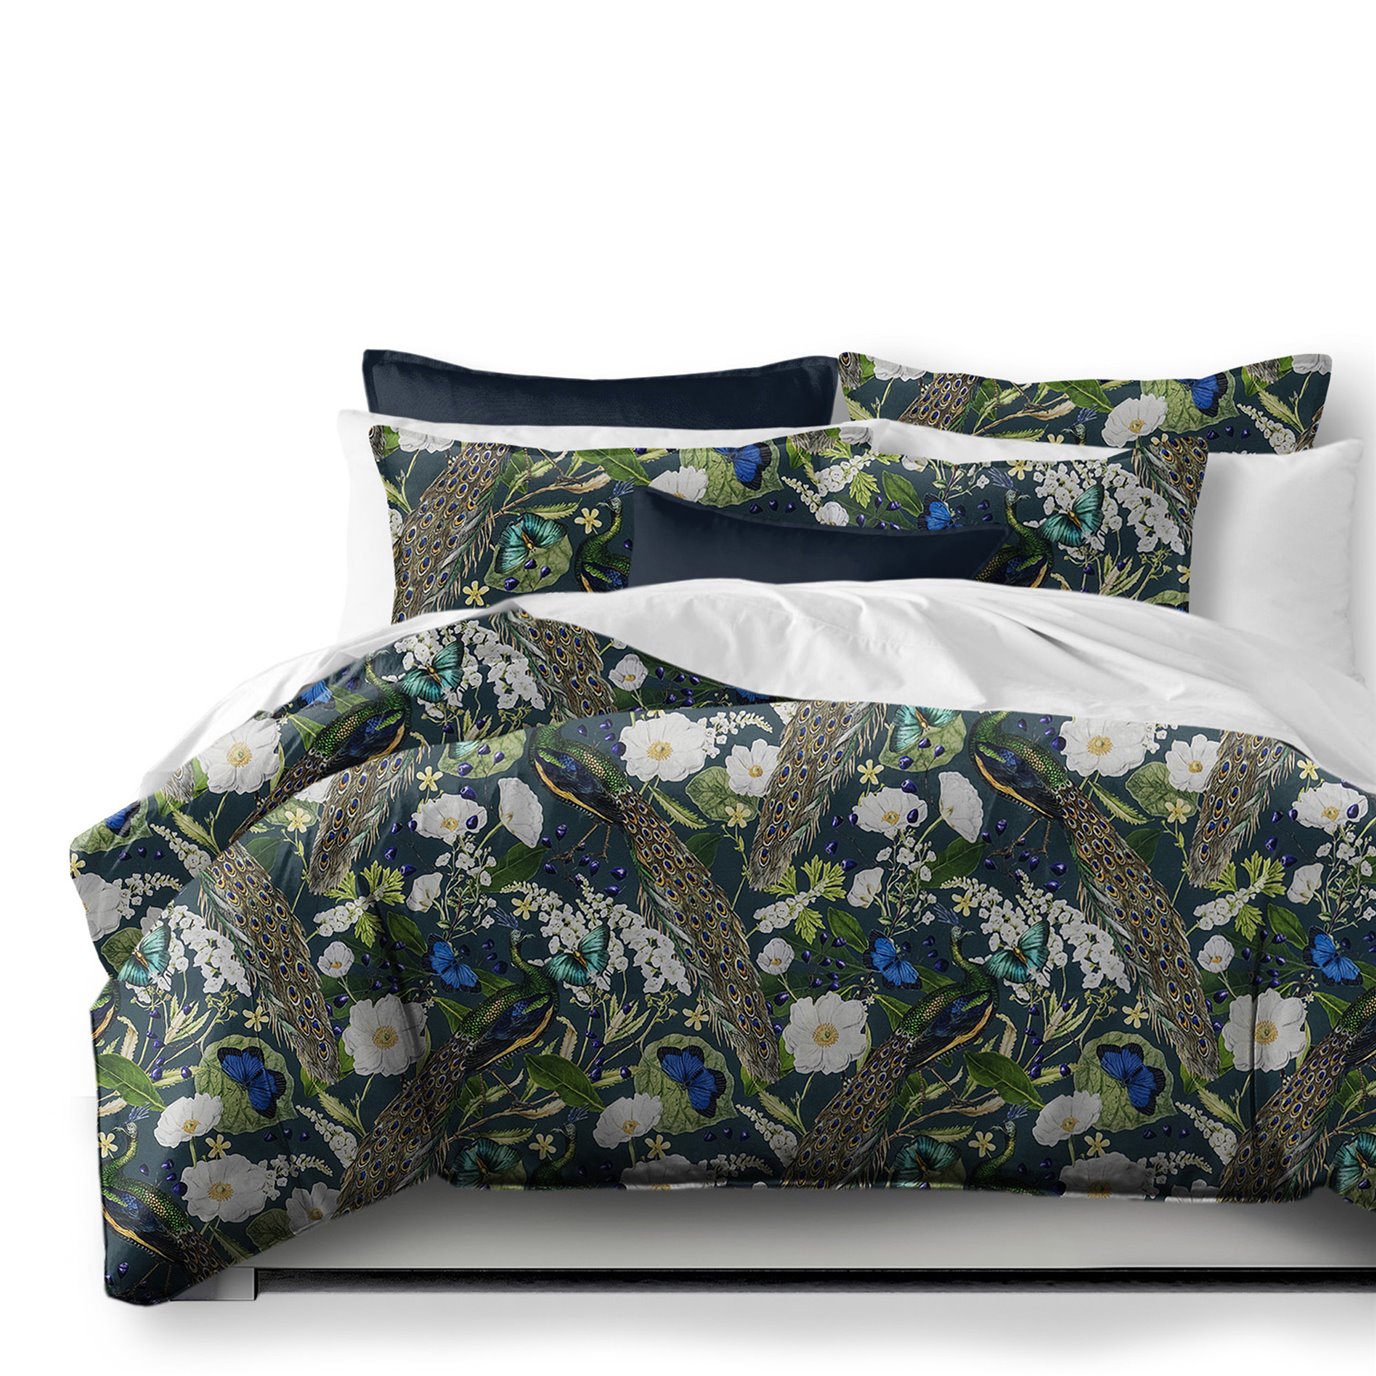 Peacock Print Teal/Navy Duvet Cover and Pillow Sham(s) Set - Size Queen